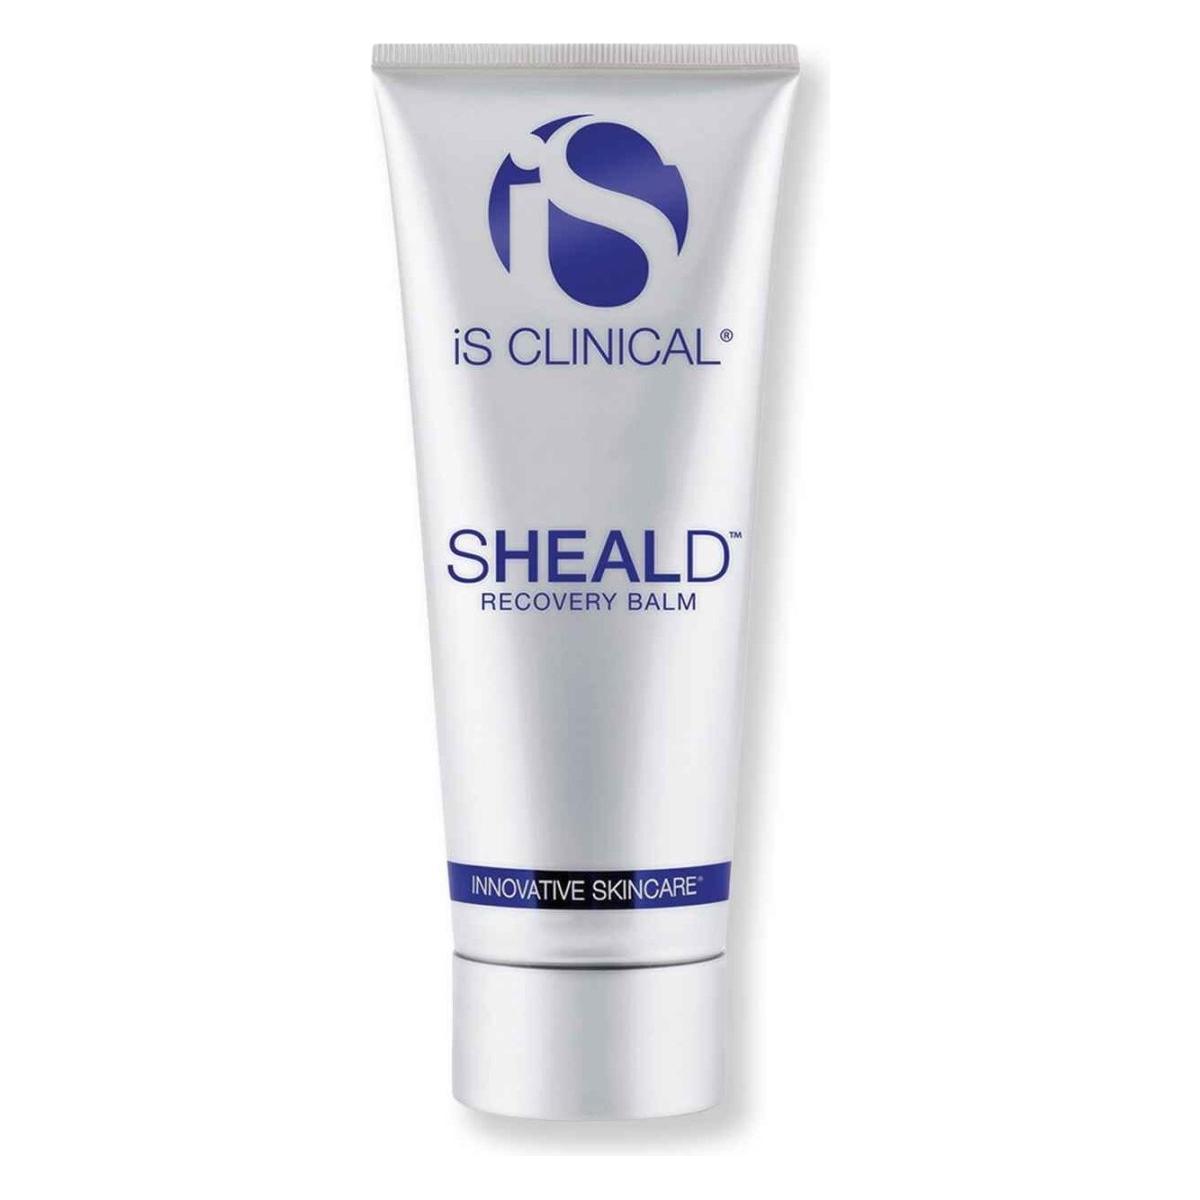 iS Clinical Sheald Recovery Balm 2 oz60 g - Glam Global UK